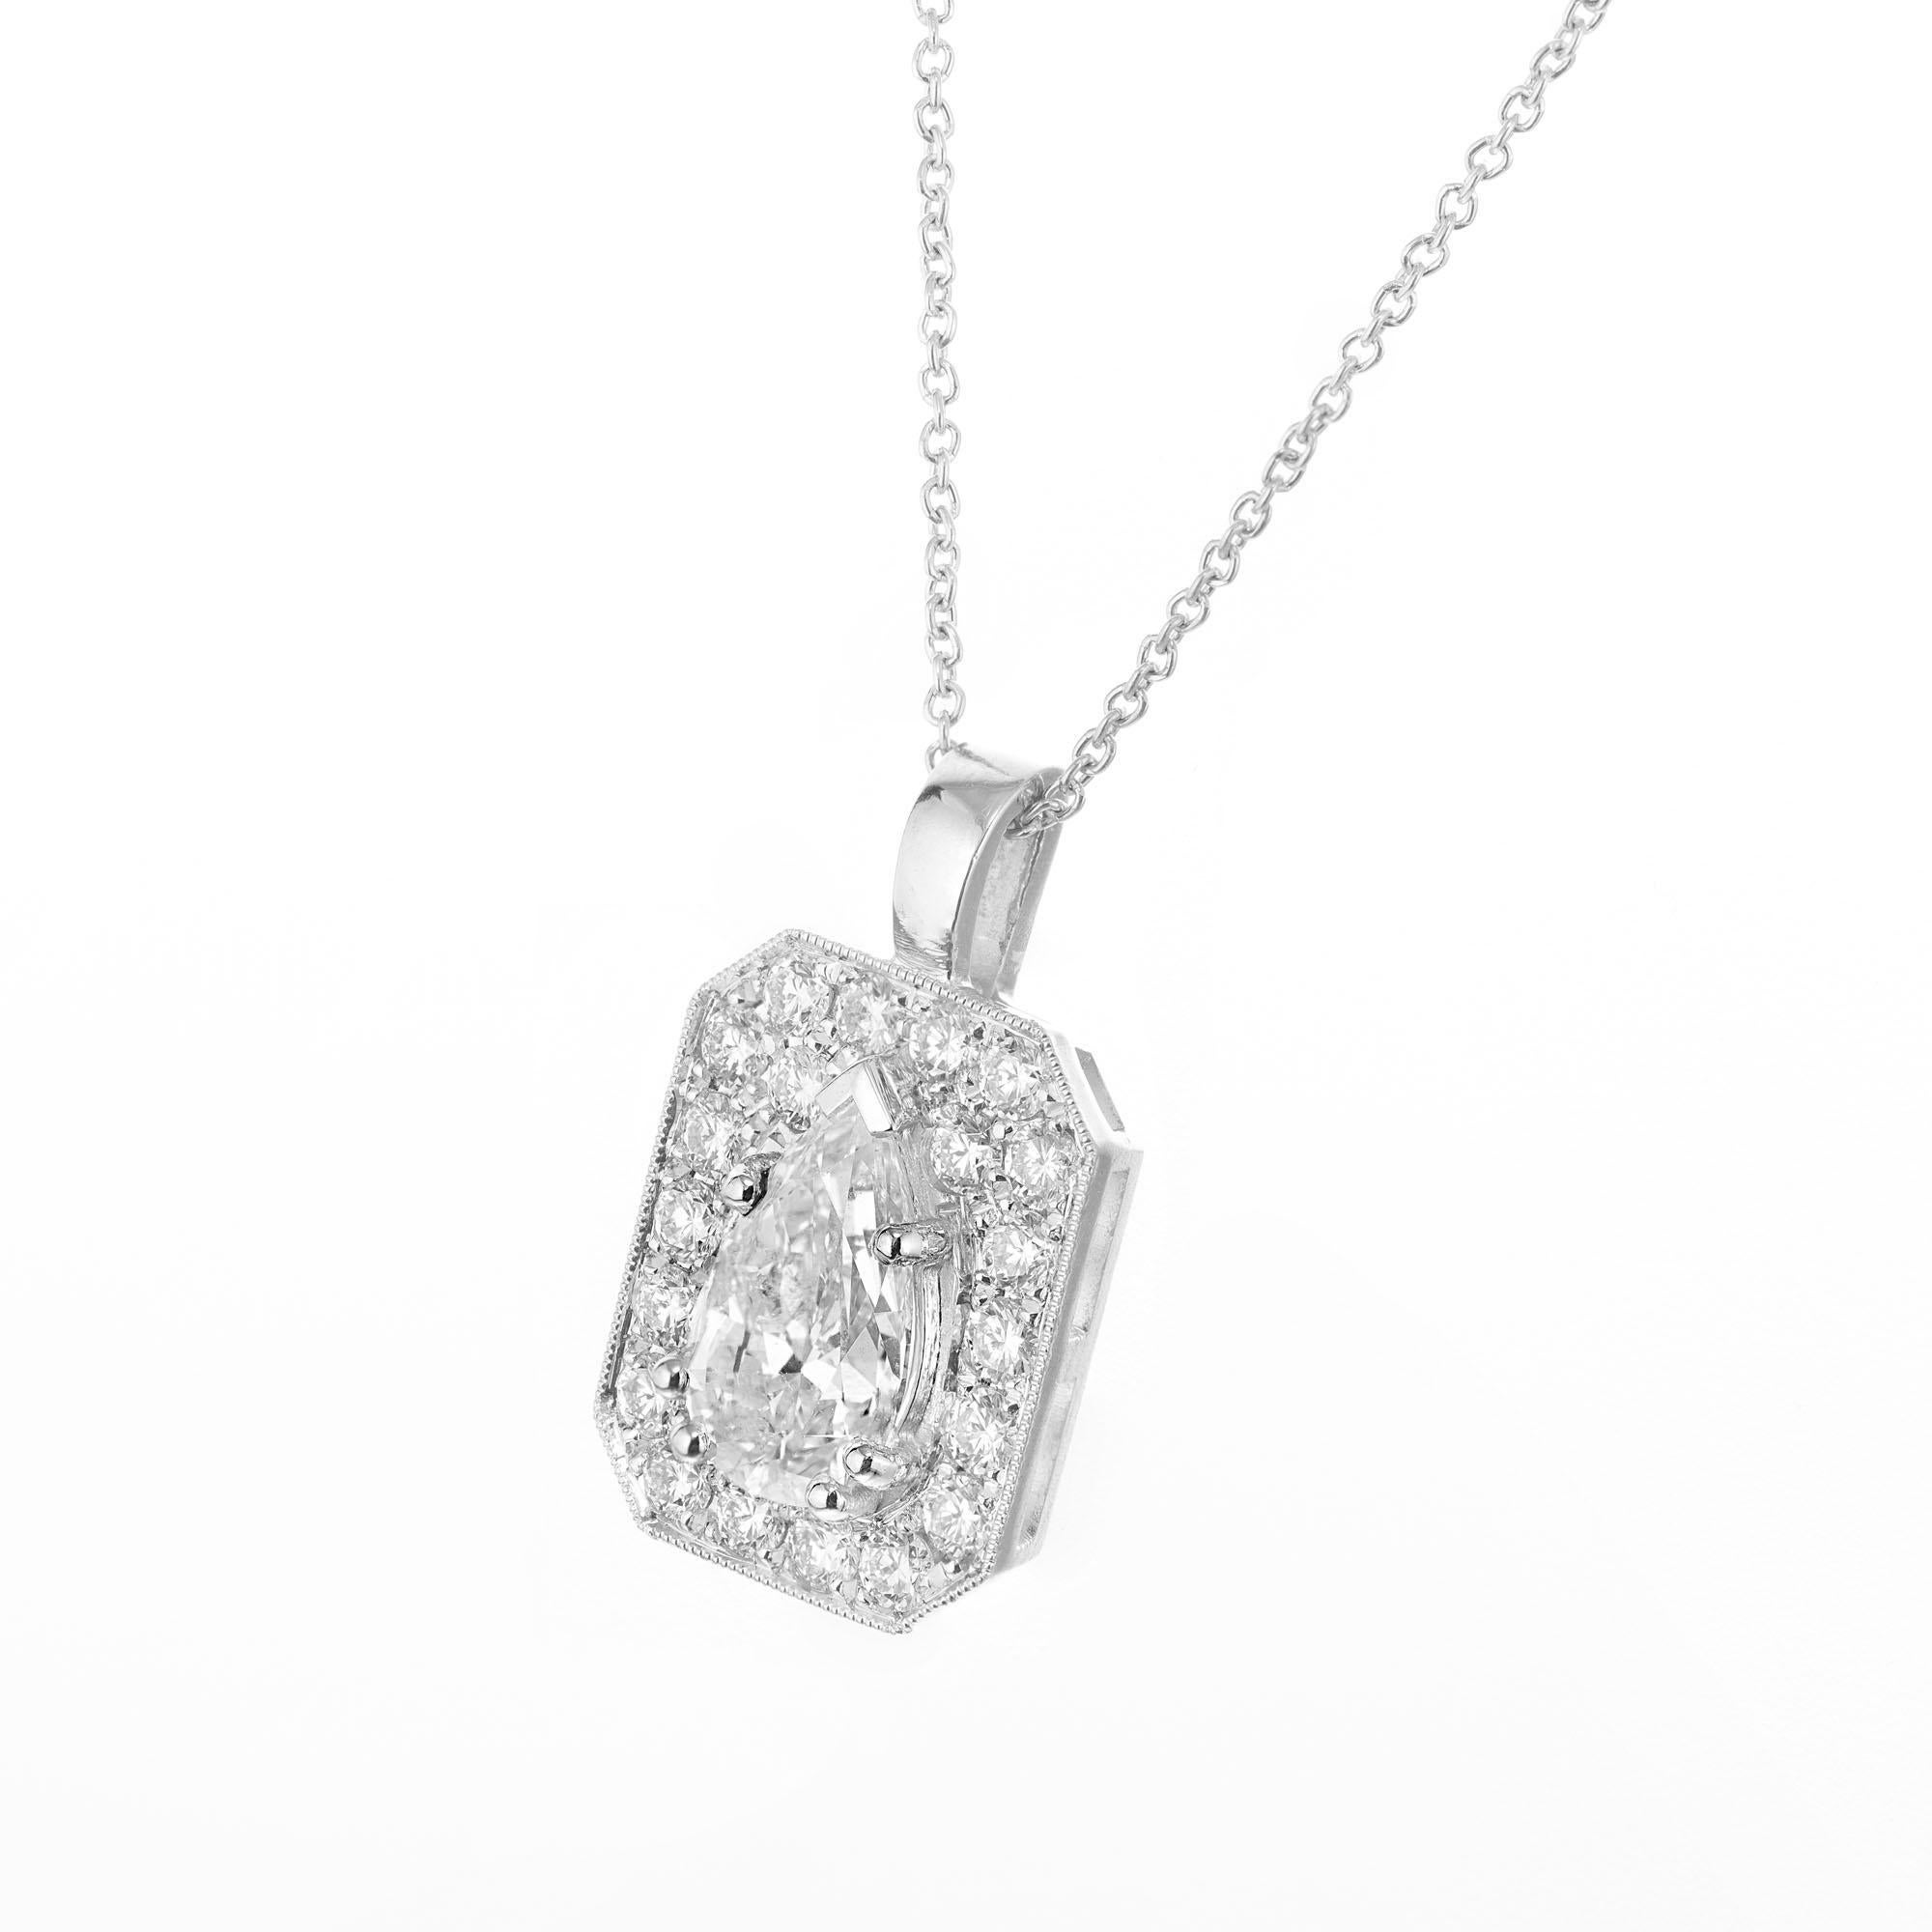 Pear-shaped diamond in an octagonal pave diamond halo frame. Set in platinum with a 16 inch chain. Designed and crafted in the Peter Suchy Workshop. 

1 pear-shaped well-cut diamond, approx. total weight 1.01cts, G, I1, 8.63 x 5.50 x 3.56mm, EGL